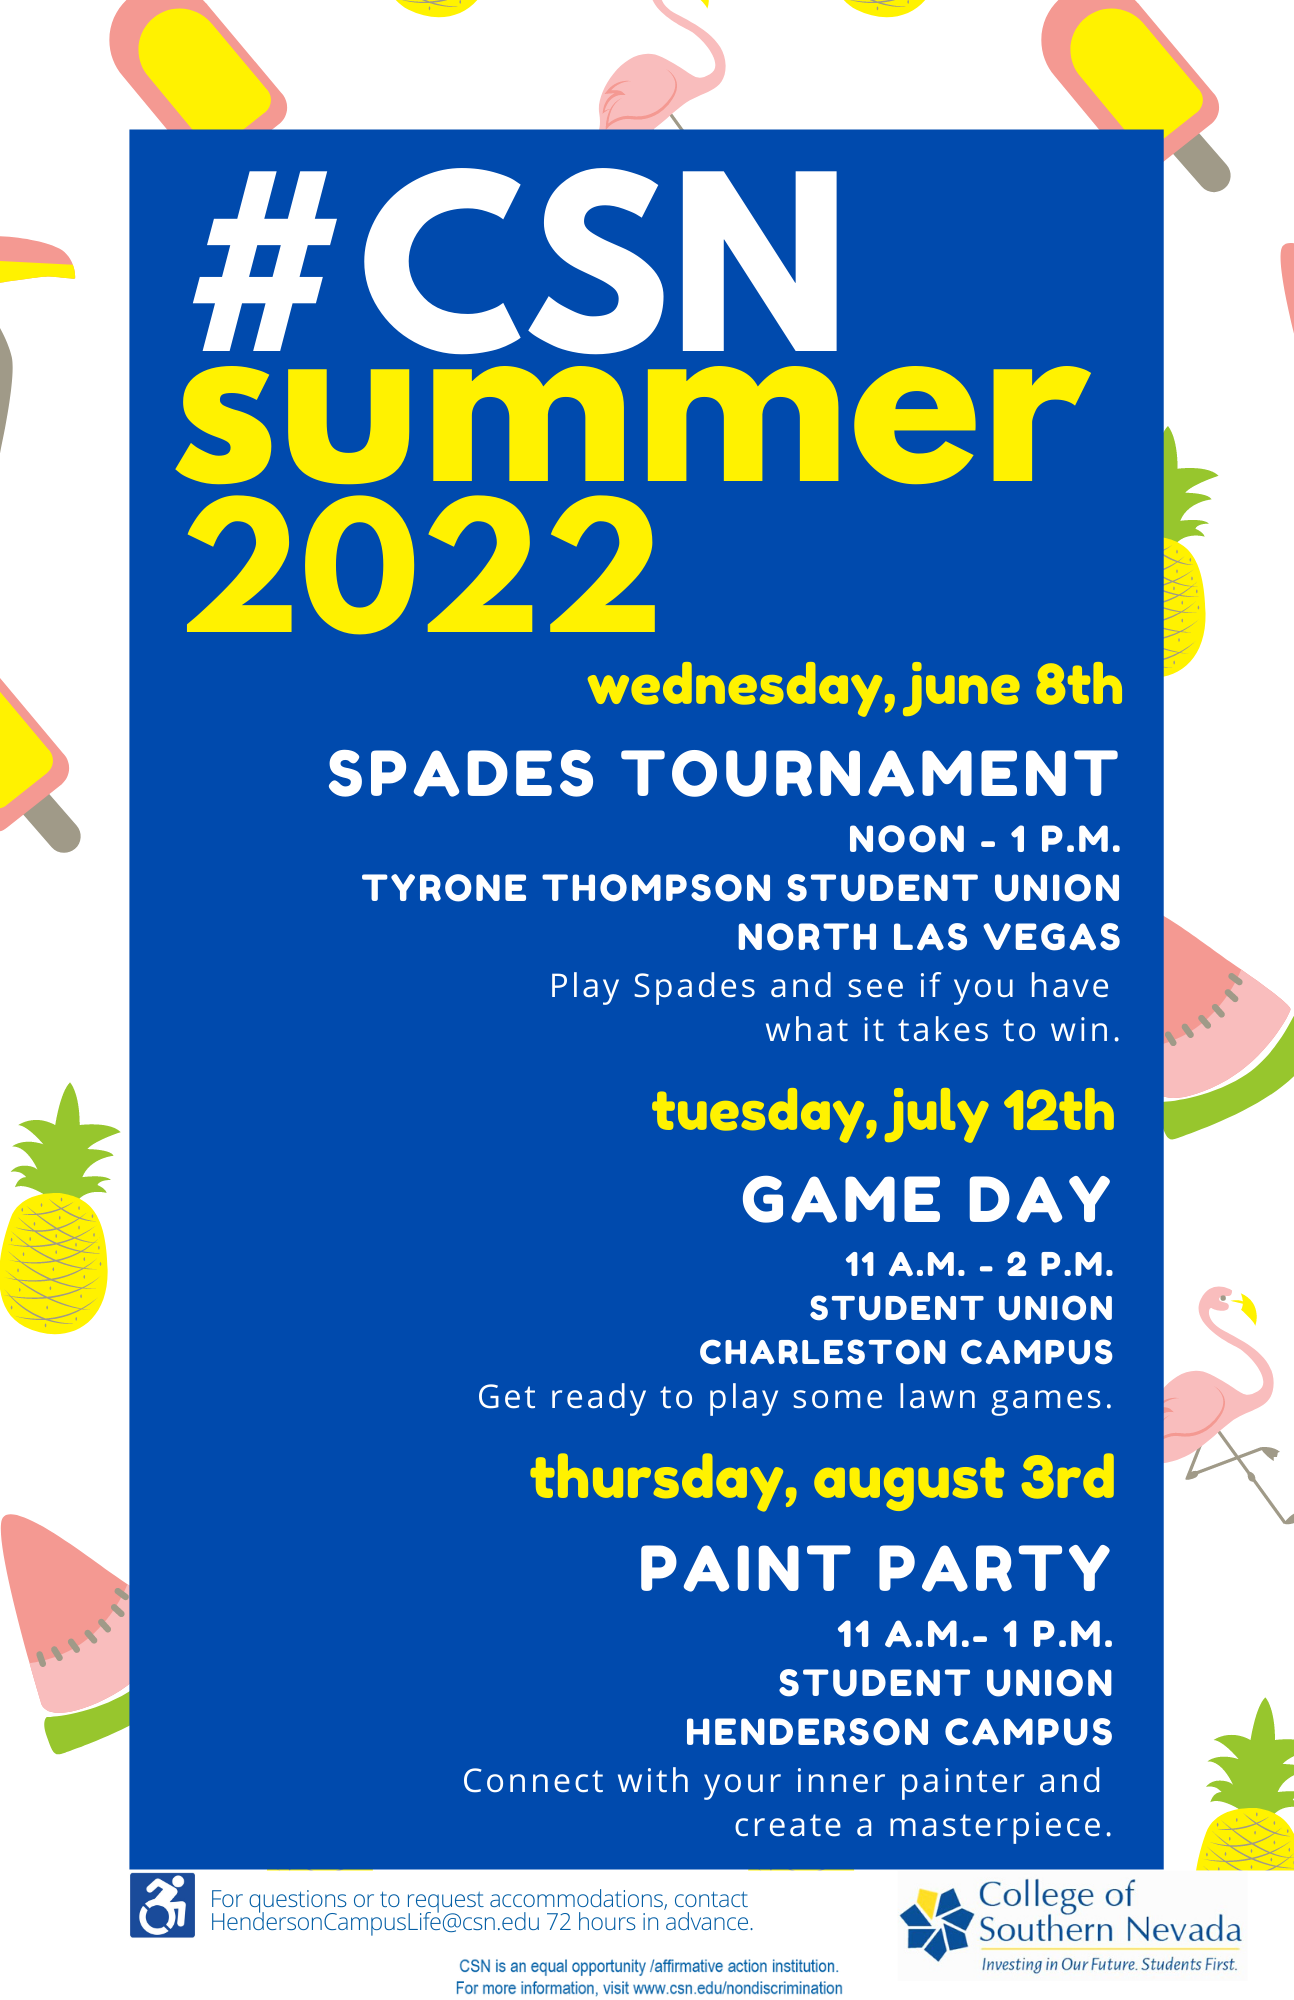 Event flyer for summer 2022 events